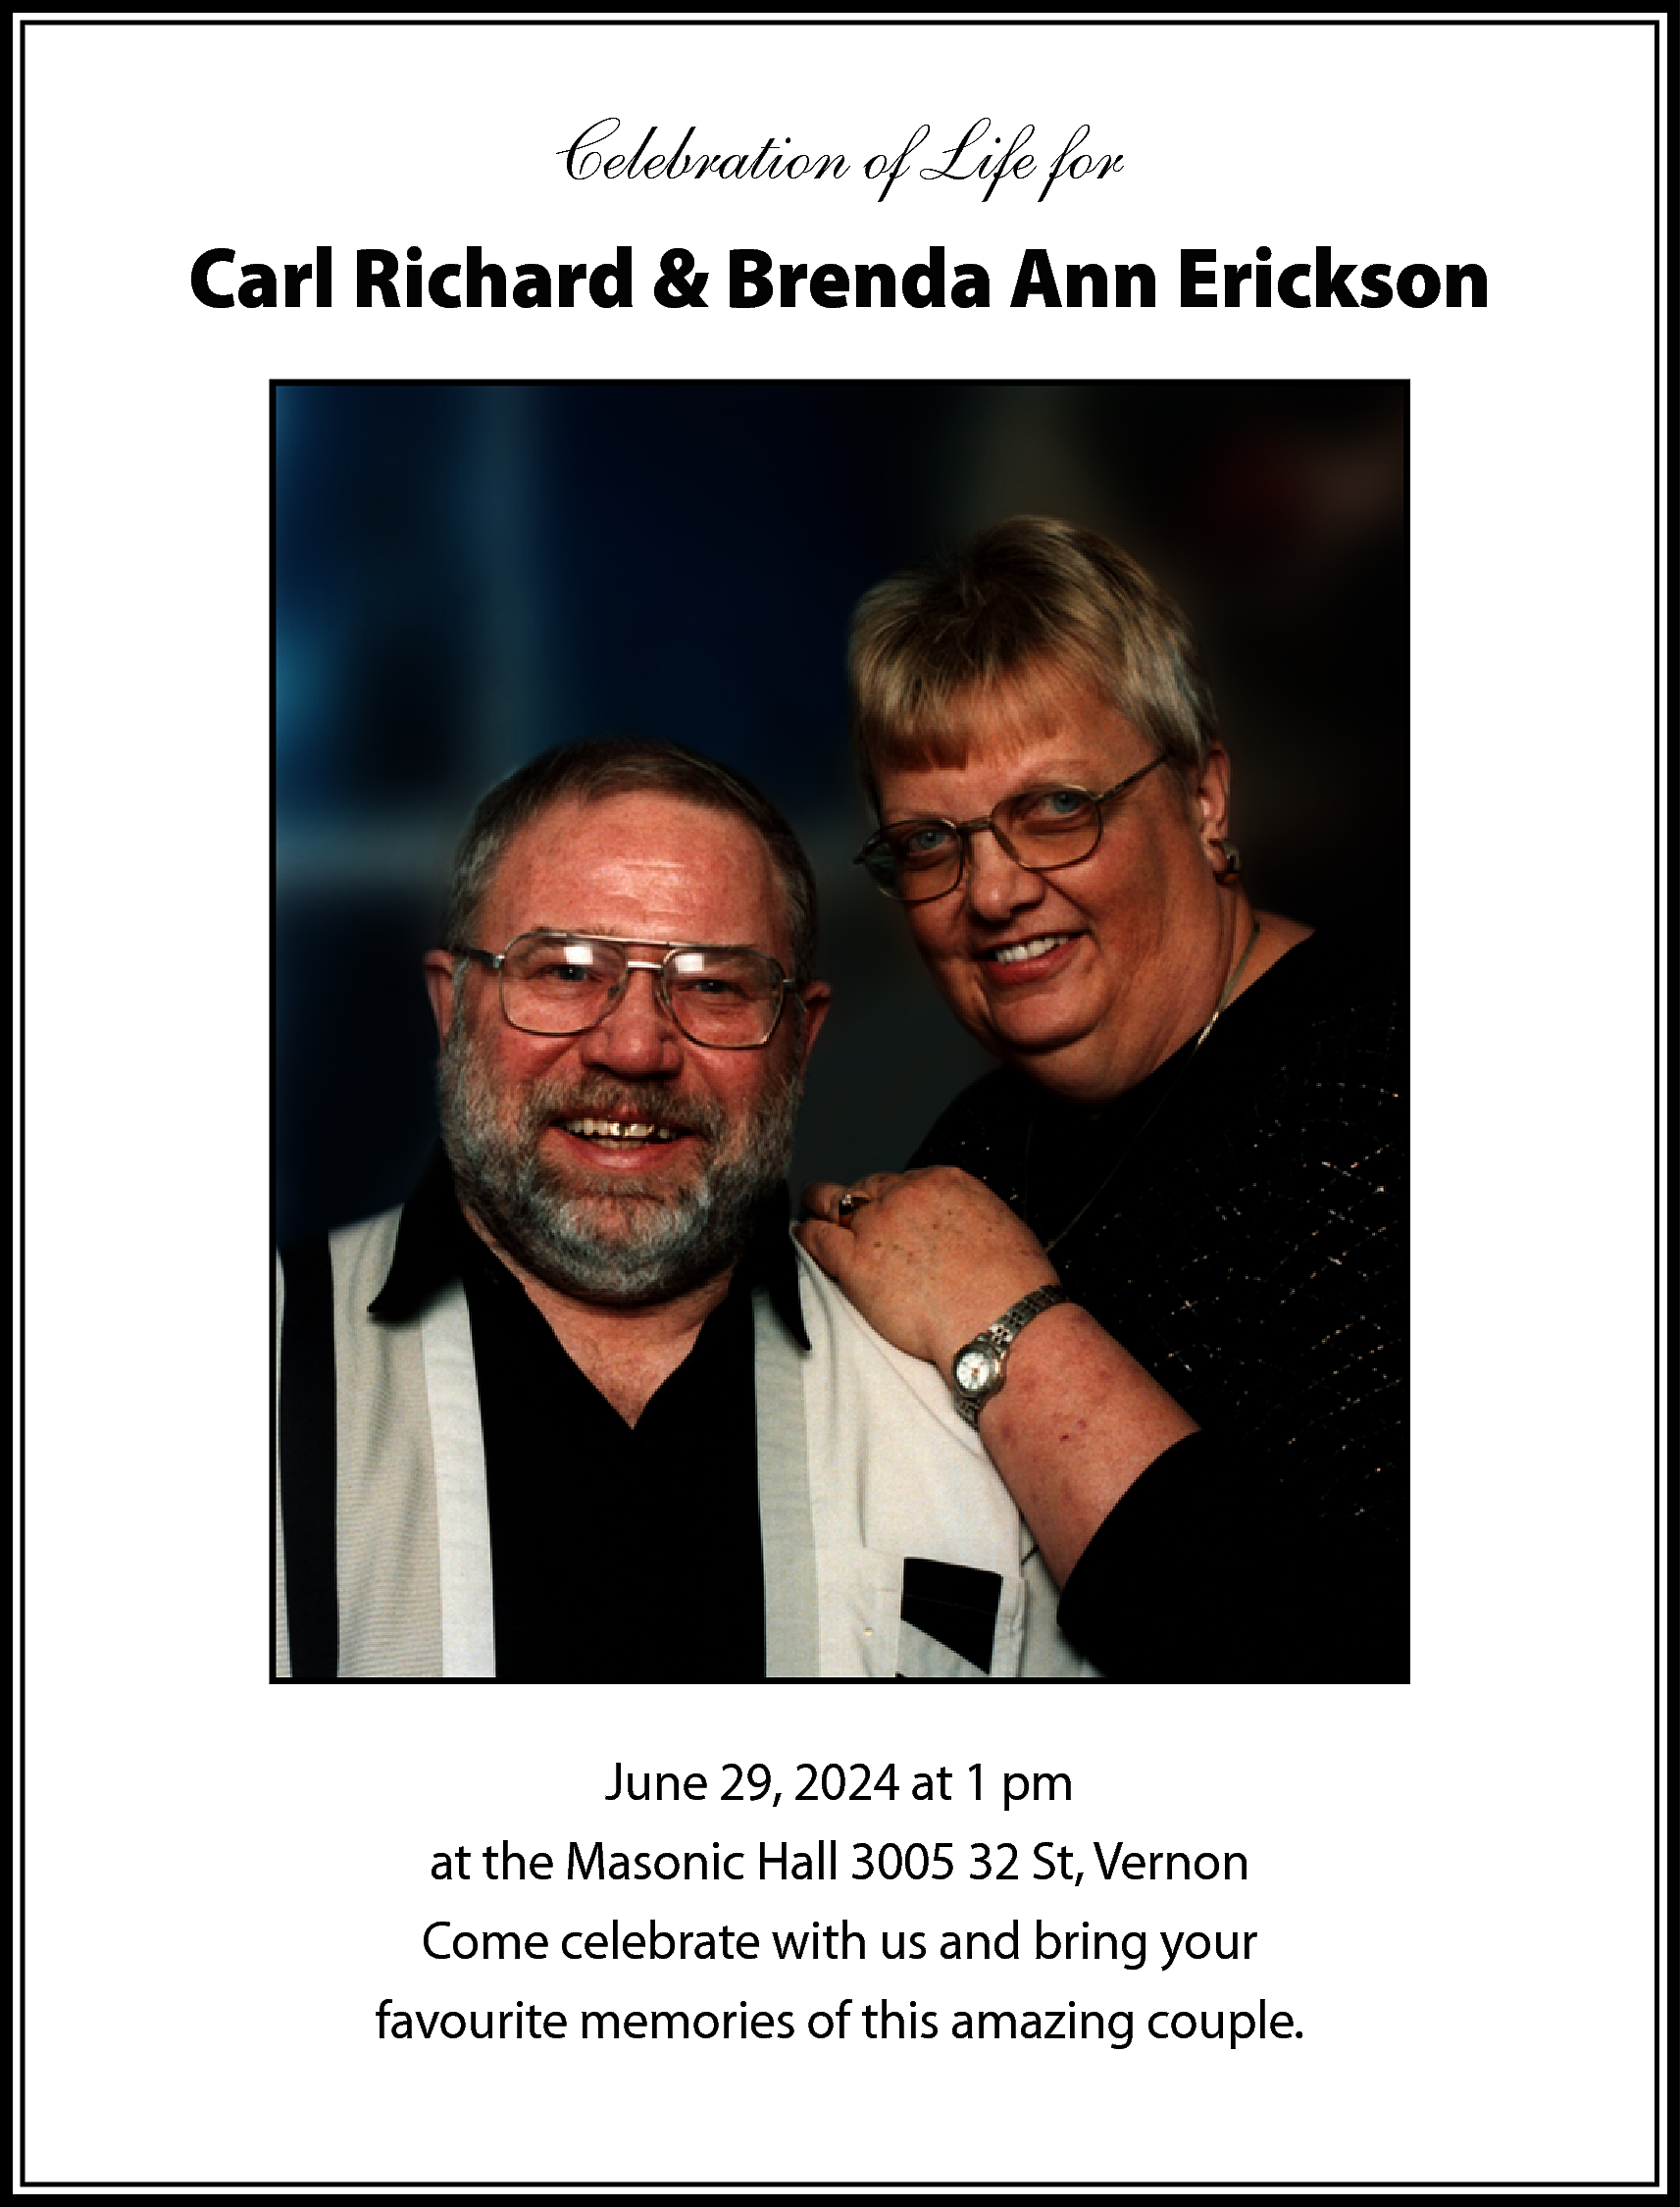 Celebration of Life for <br>Carl  Celebration of Life for  Carl Richard & Brenda Ann Erickson    June 29, 2024 at 1 pm  at the Masonic Hall 3005 32 St, Vernon  Come celebrate with us and bring your  favourite memories of this amazing couple.    